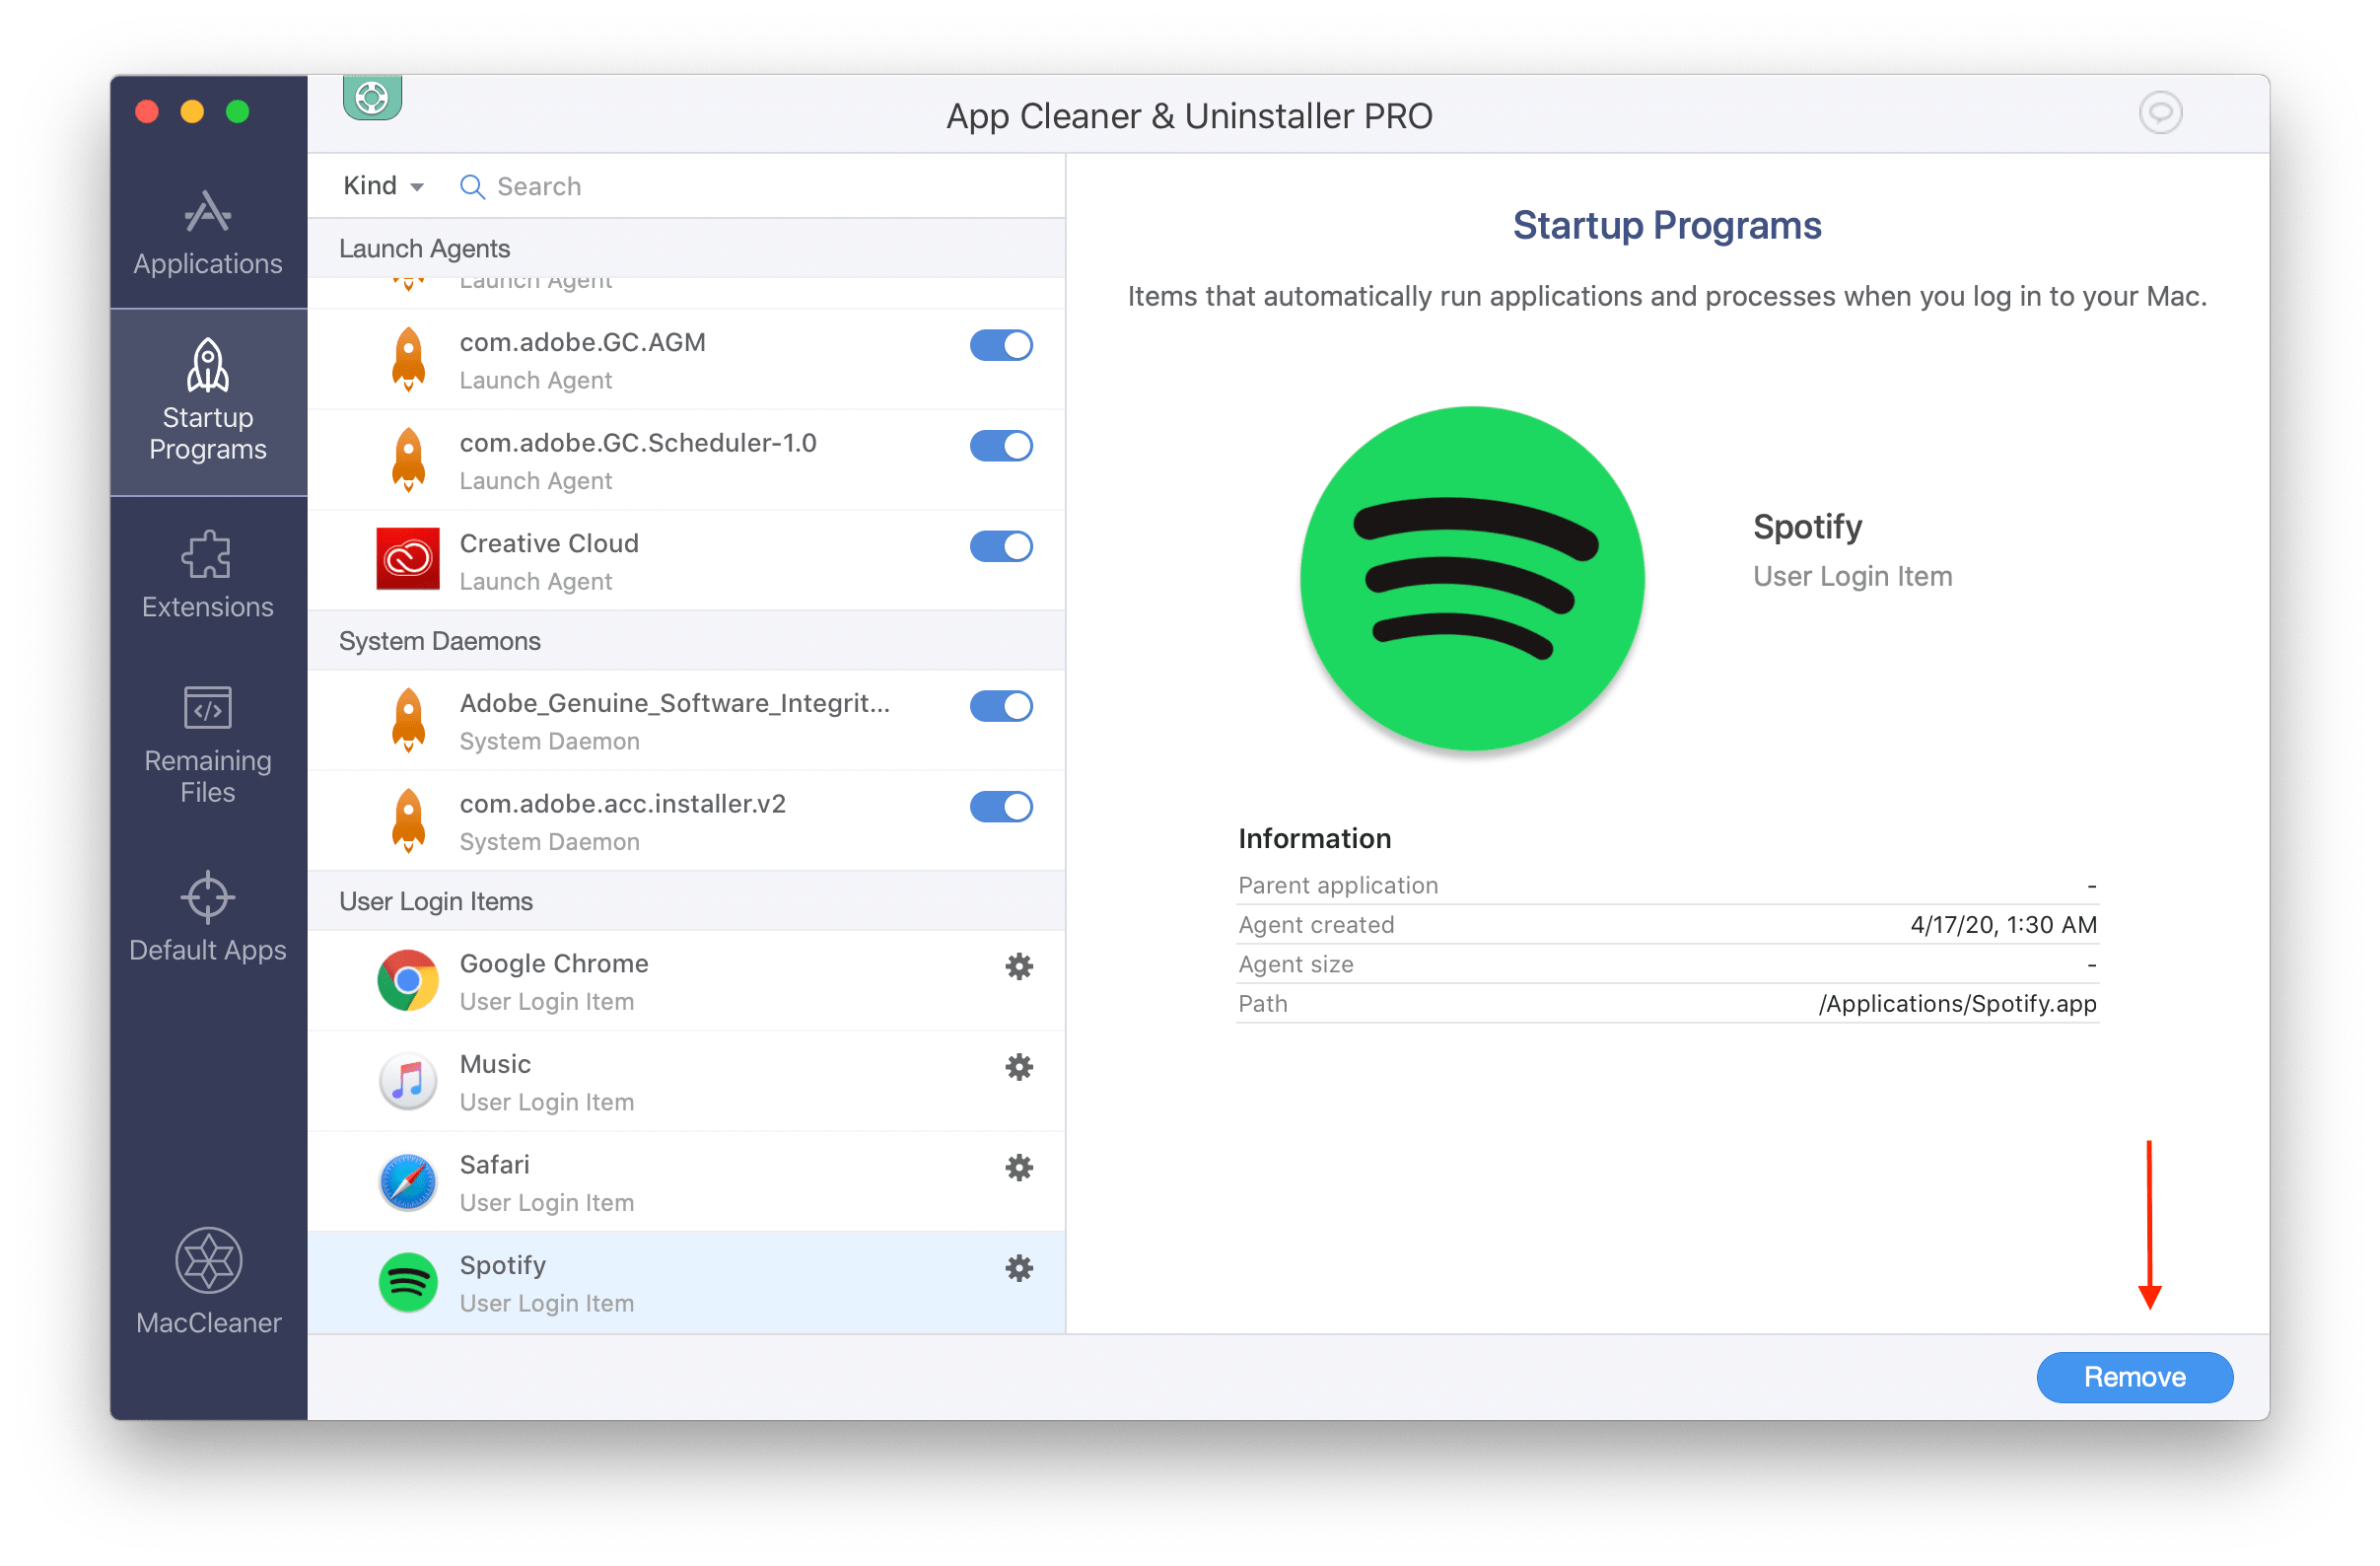 spotify app for macos